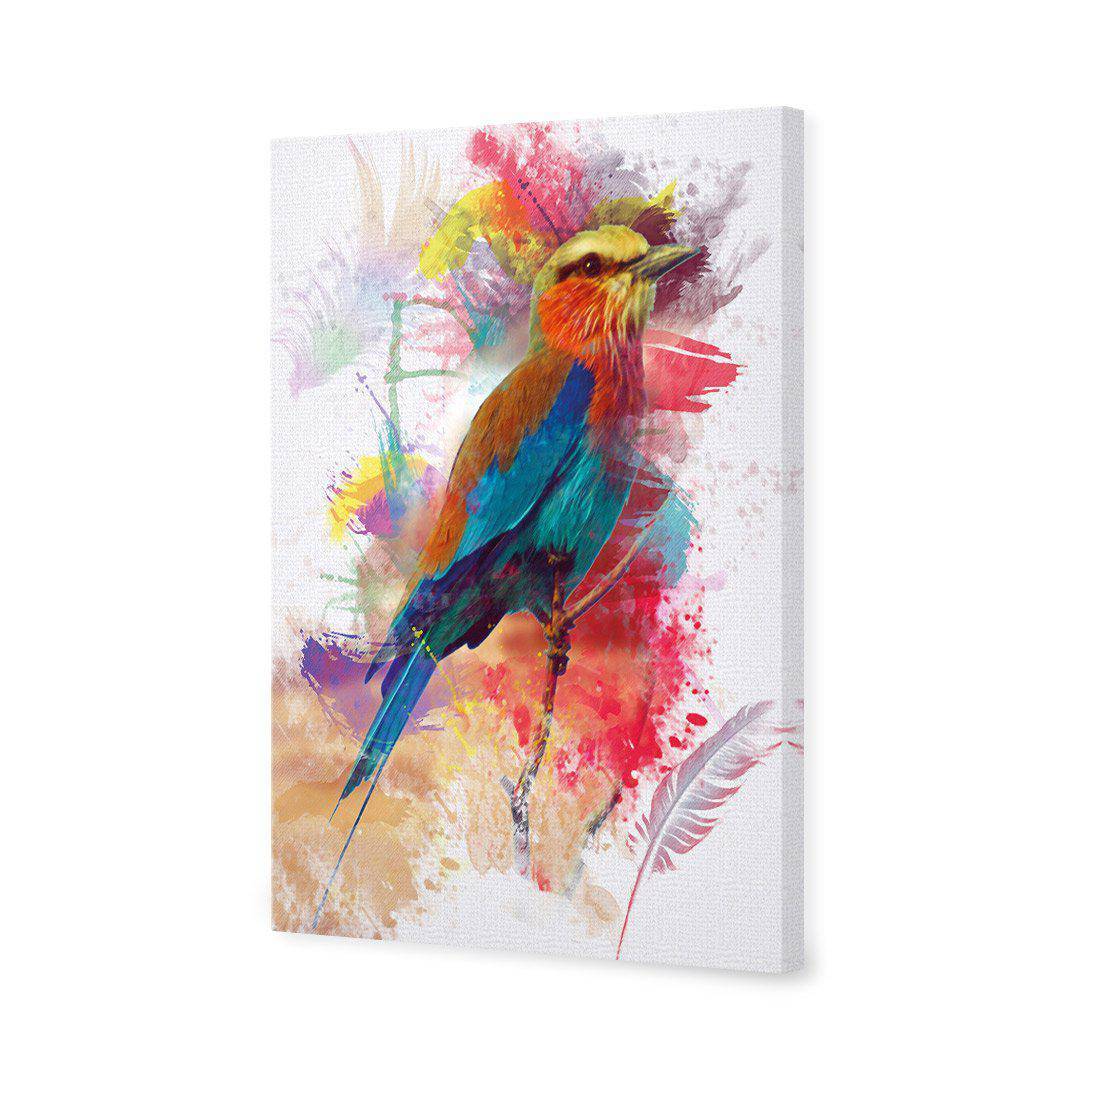 Painted Bird And Feathers Canvas Art-Canvas-Wall Art Designs-45x30cm-Canvas - No Frame-Wall Art Designs